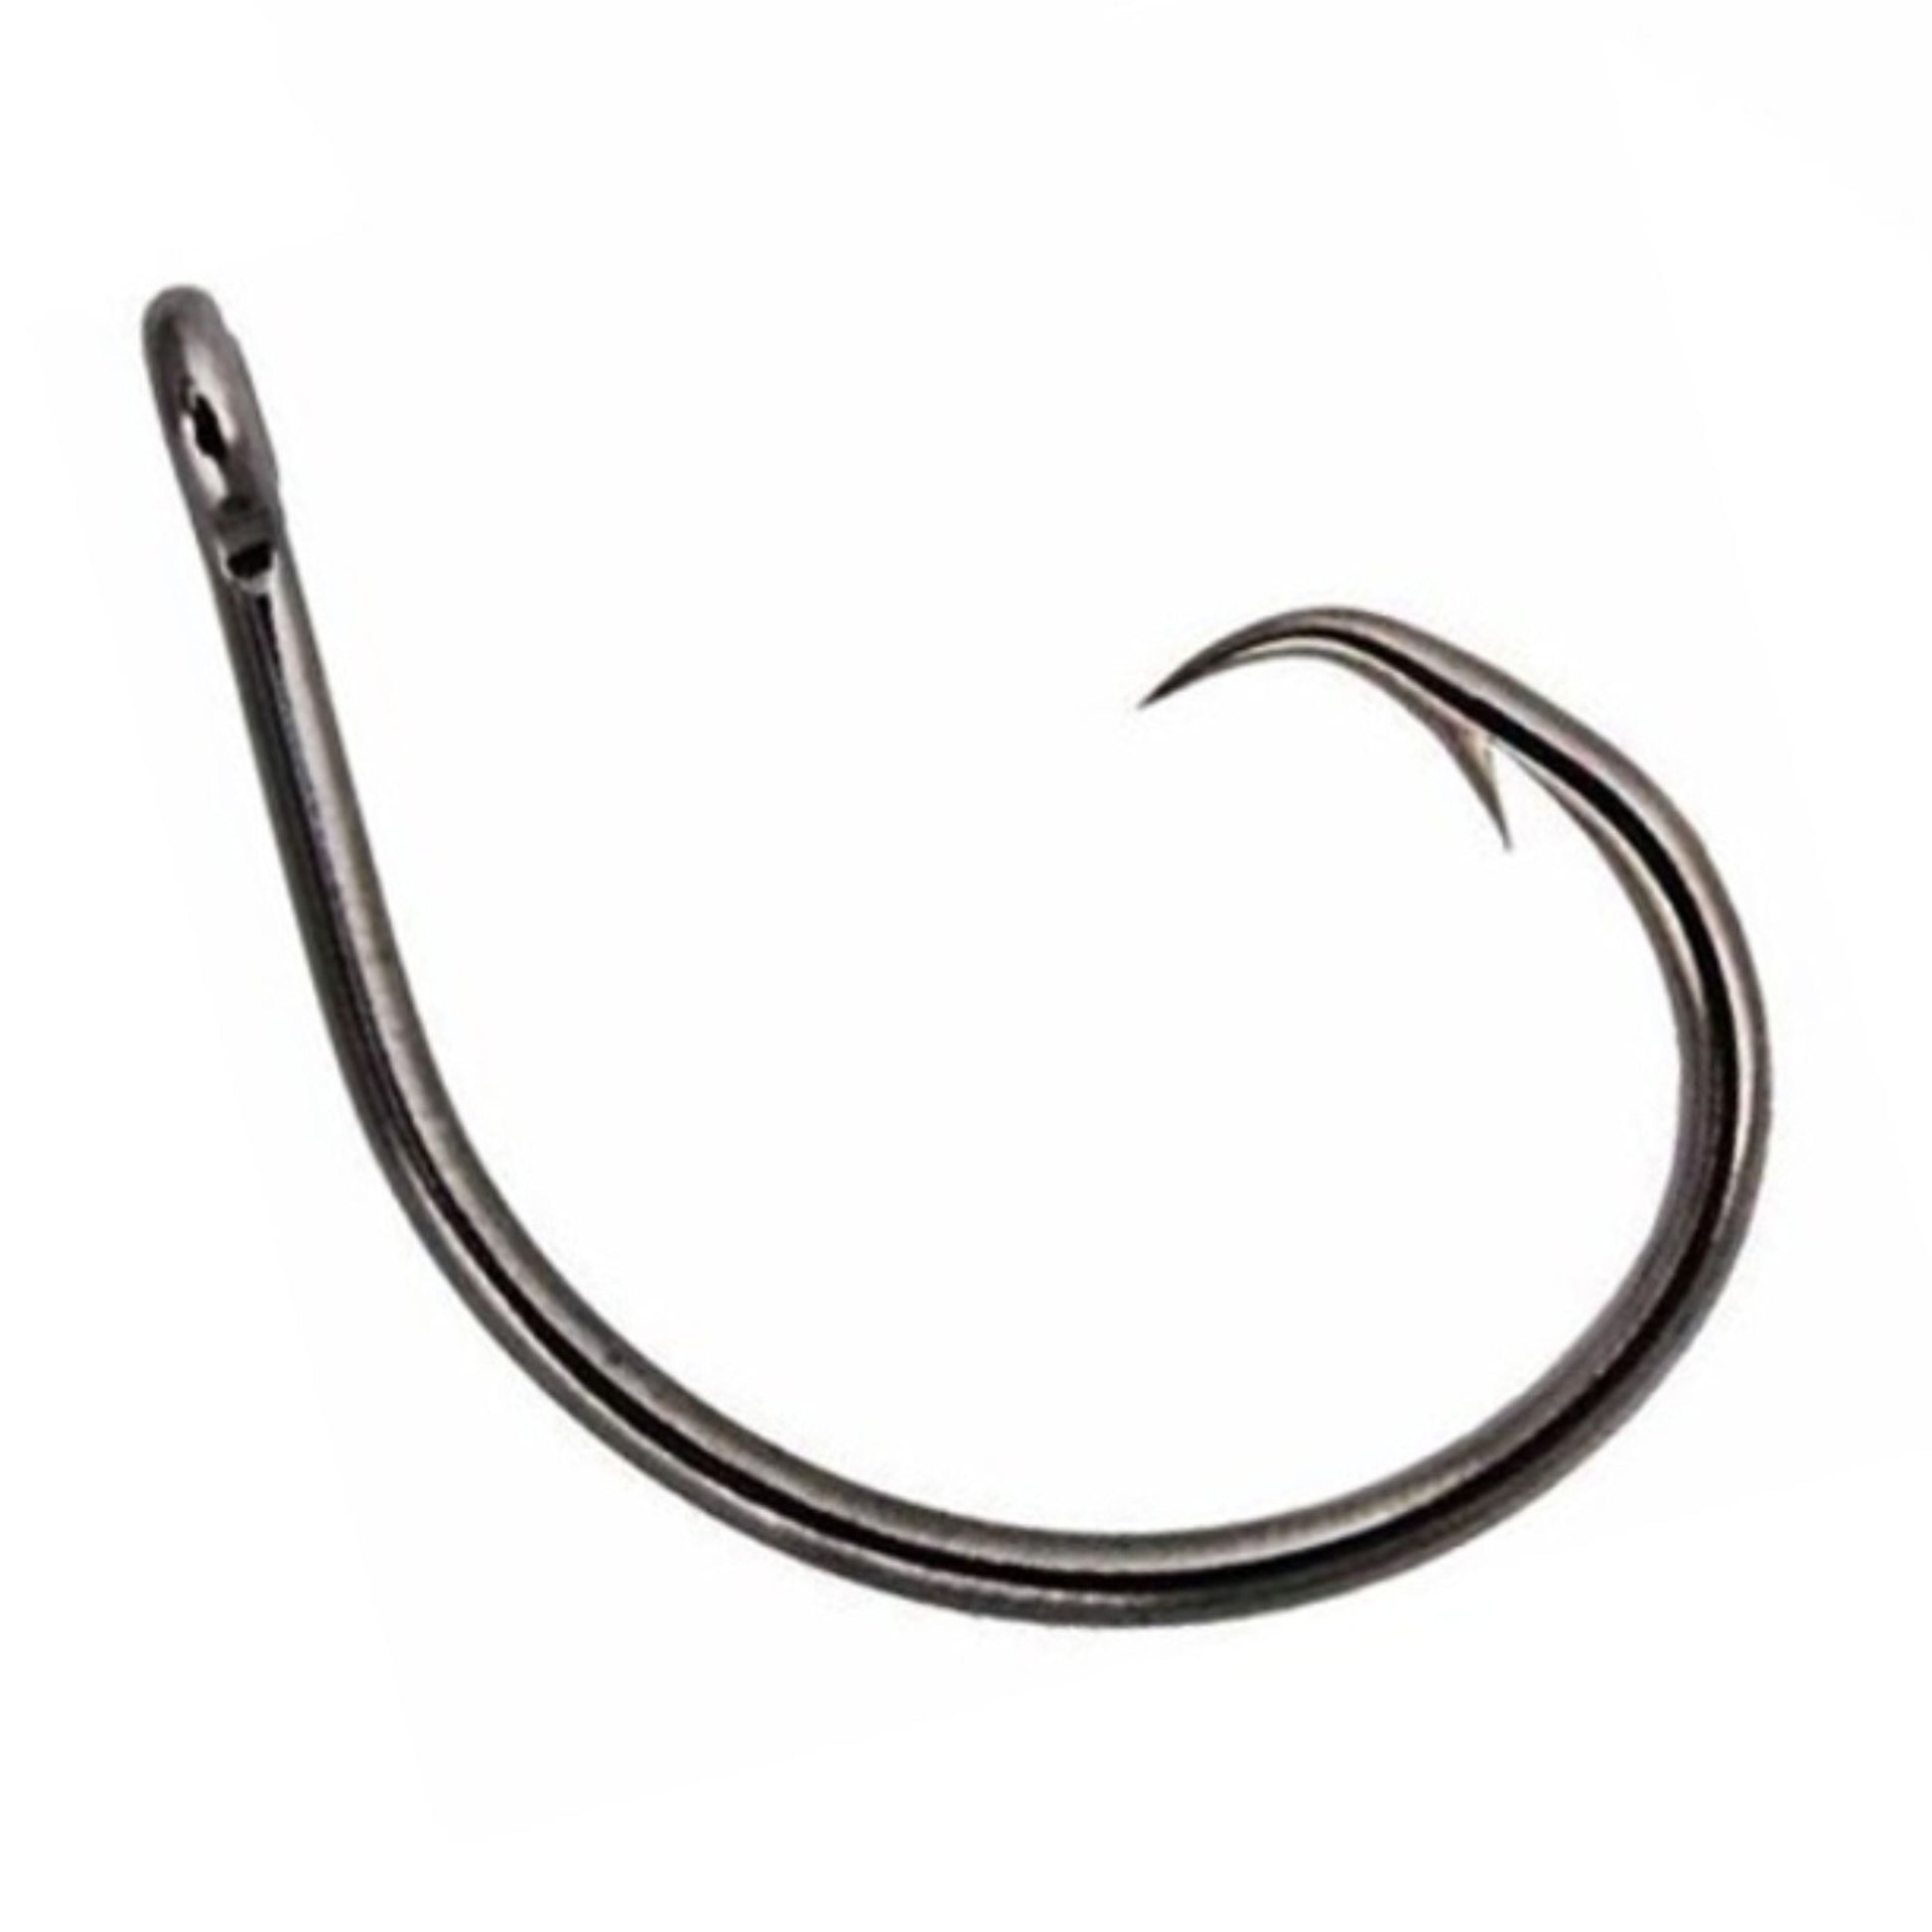 Fishing Penotrate In-Line Circle Hooks Choose Your Size 3/0 - 10/0 25-pack